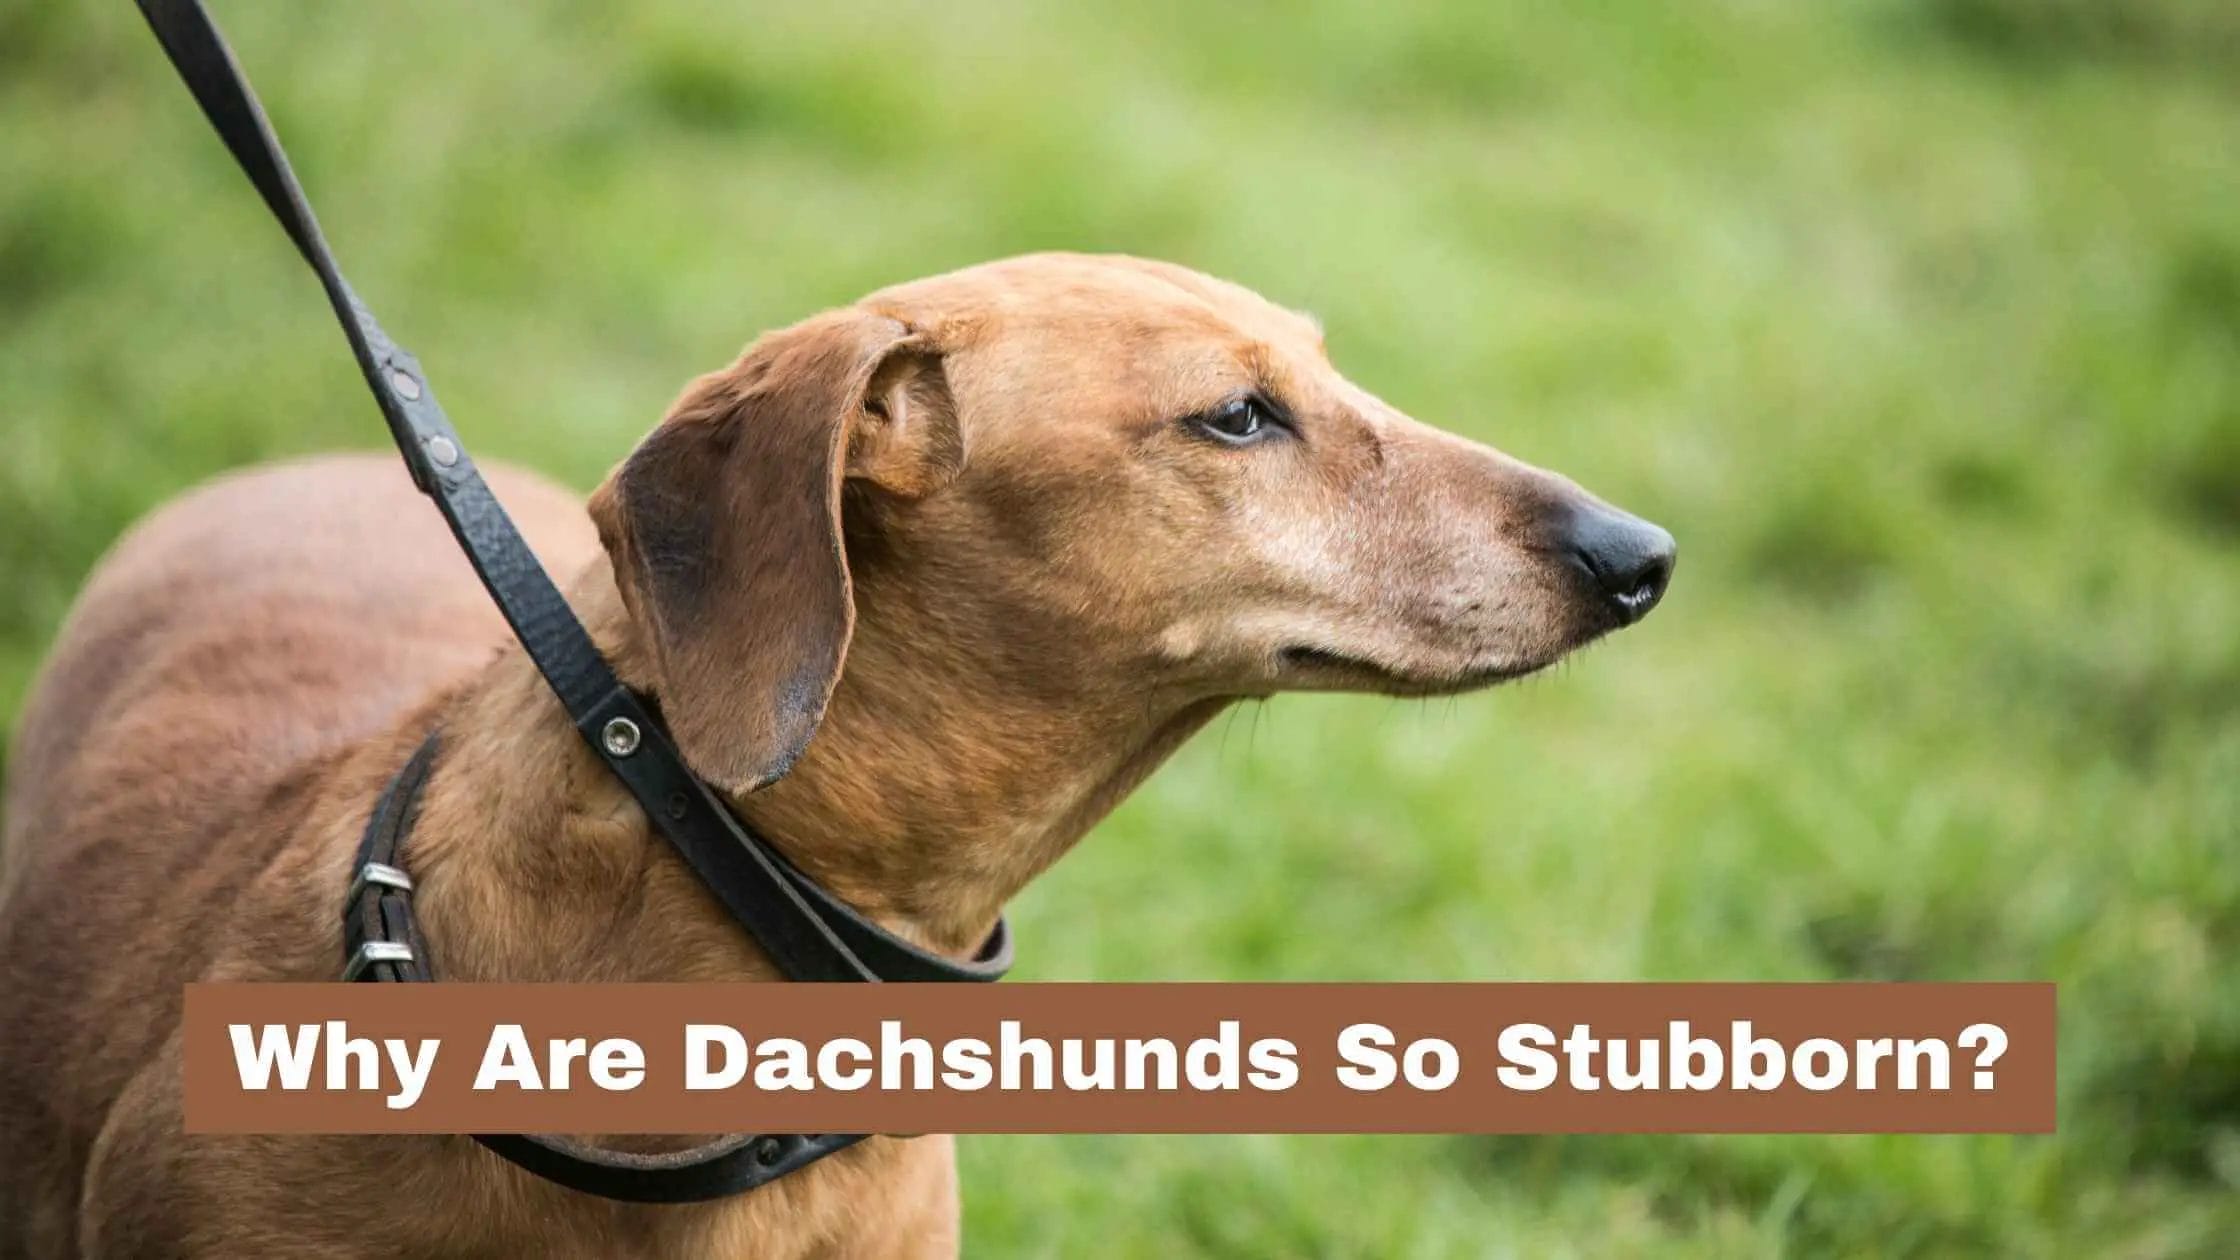 Why Are Dachshunds So Stubborn